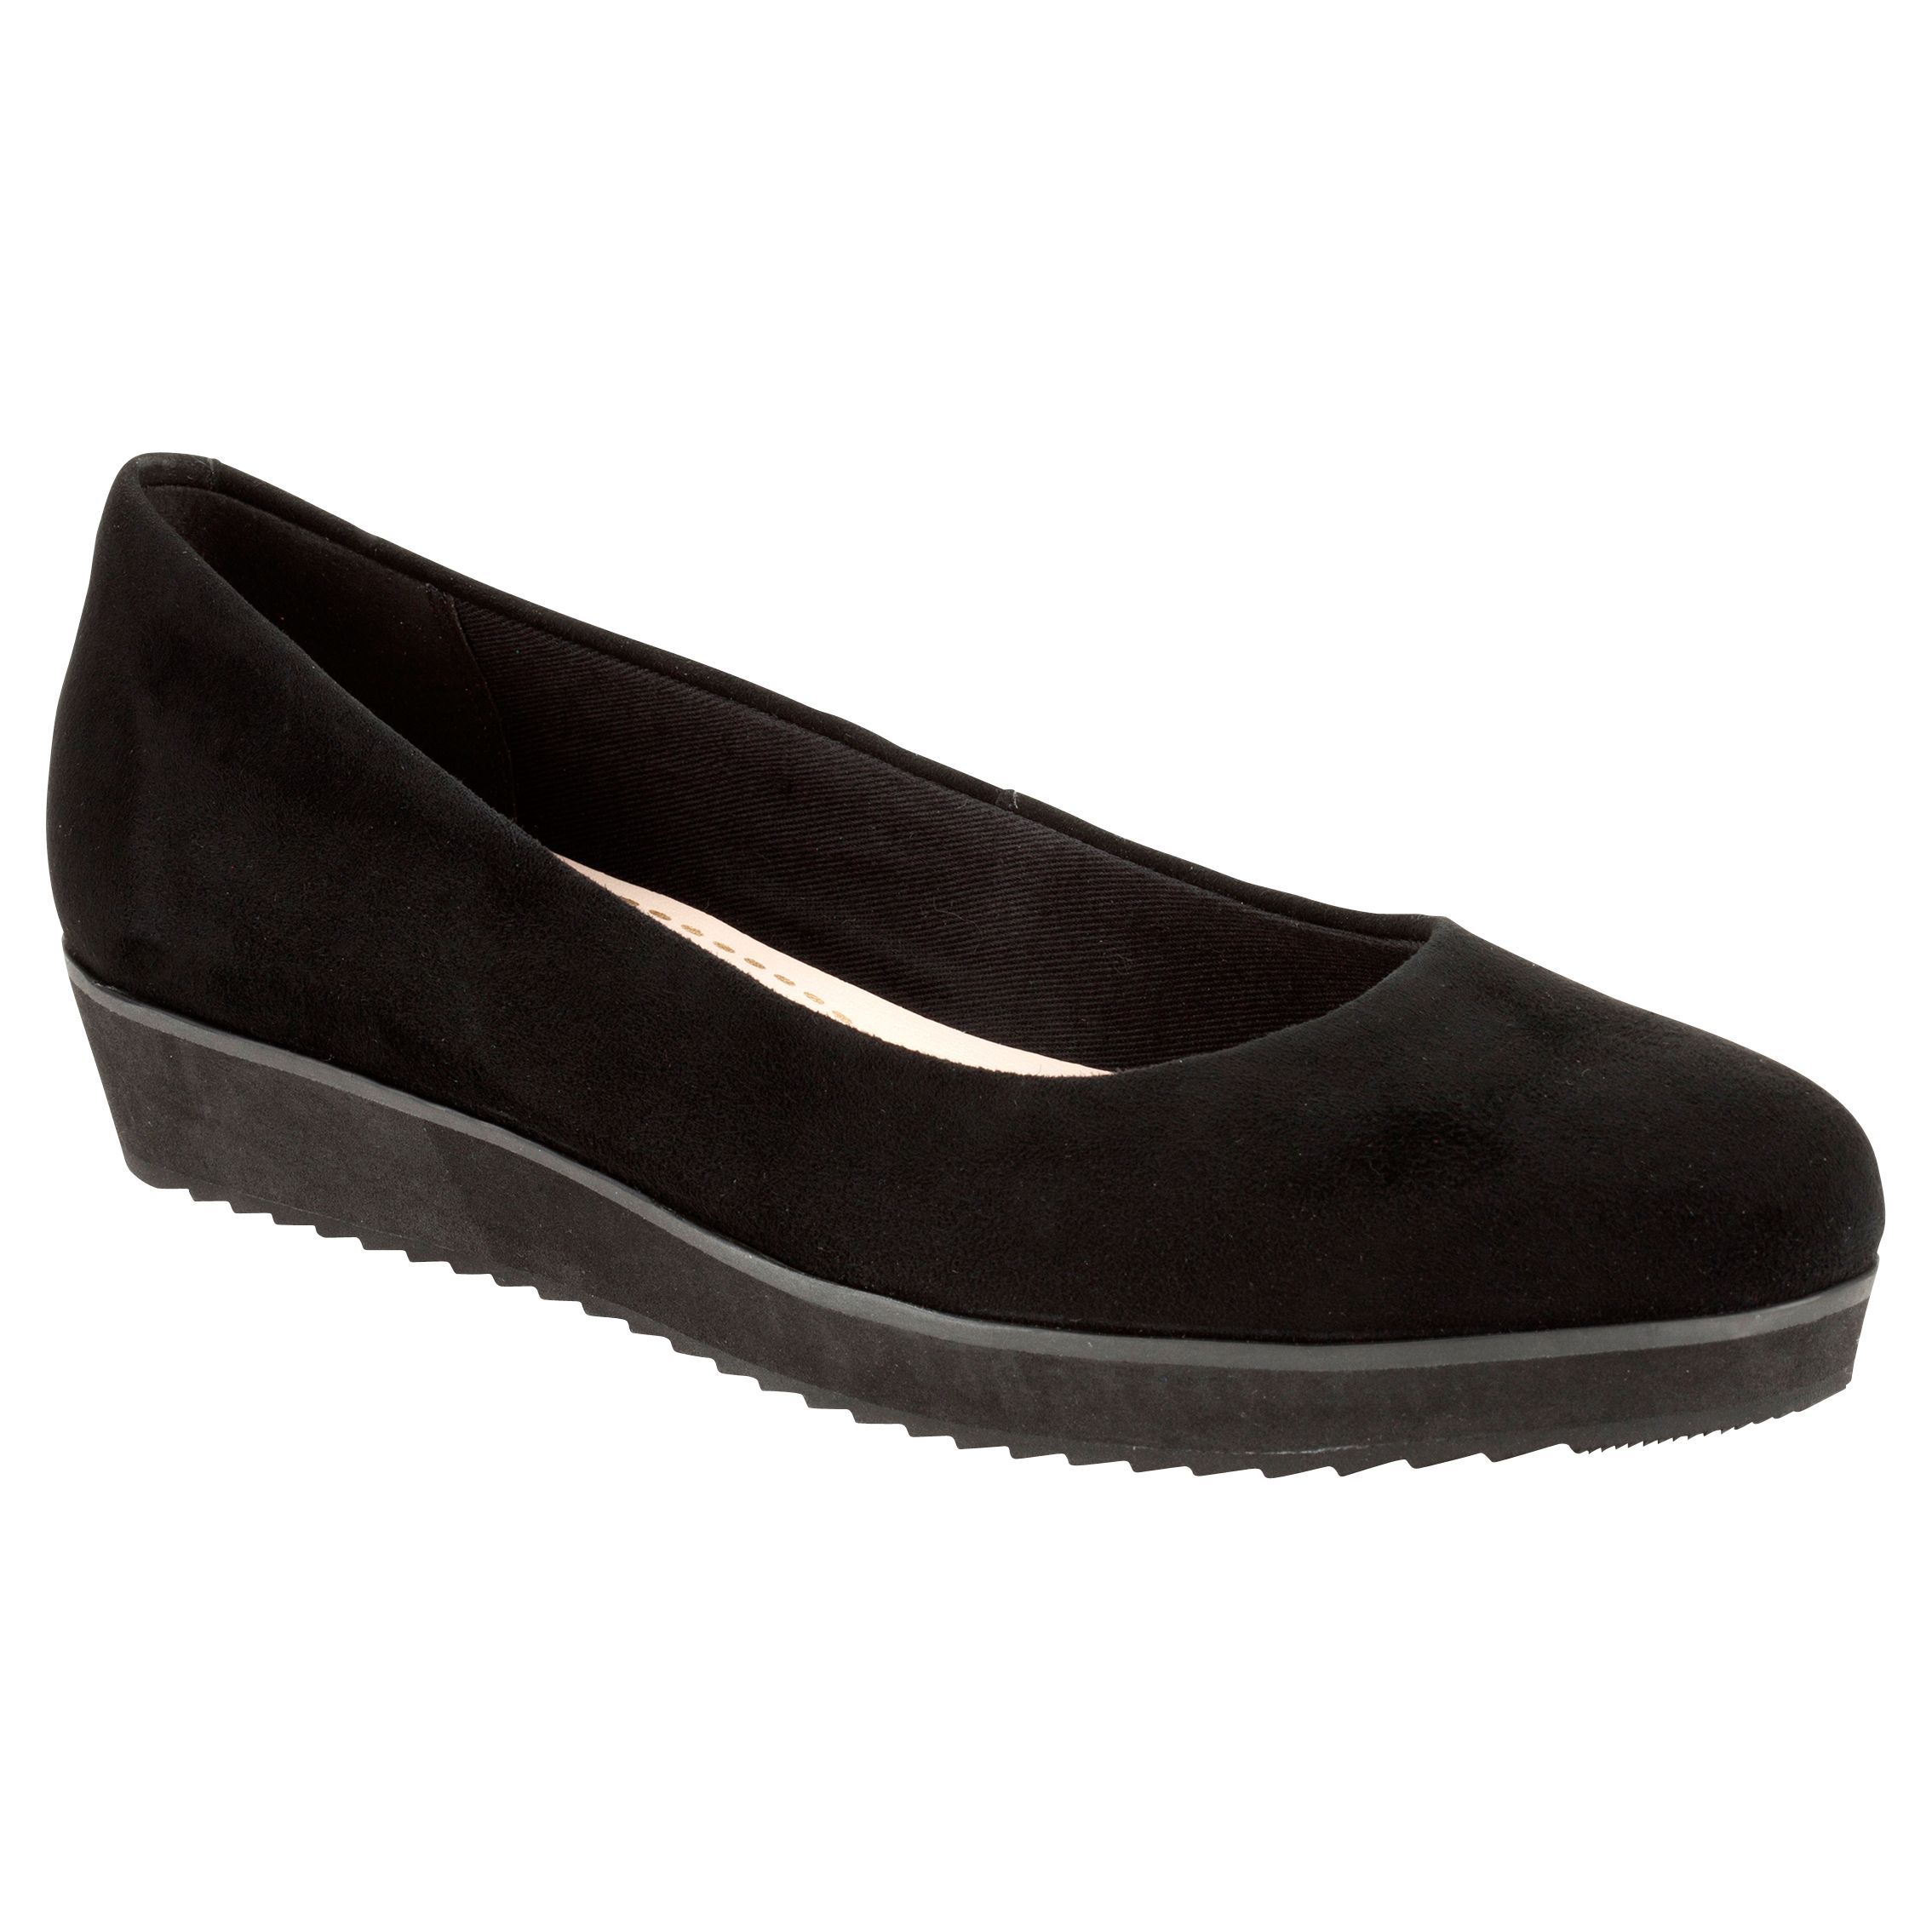 Clarks Compass Zone Shoes, Black at 